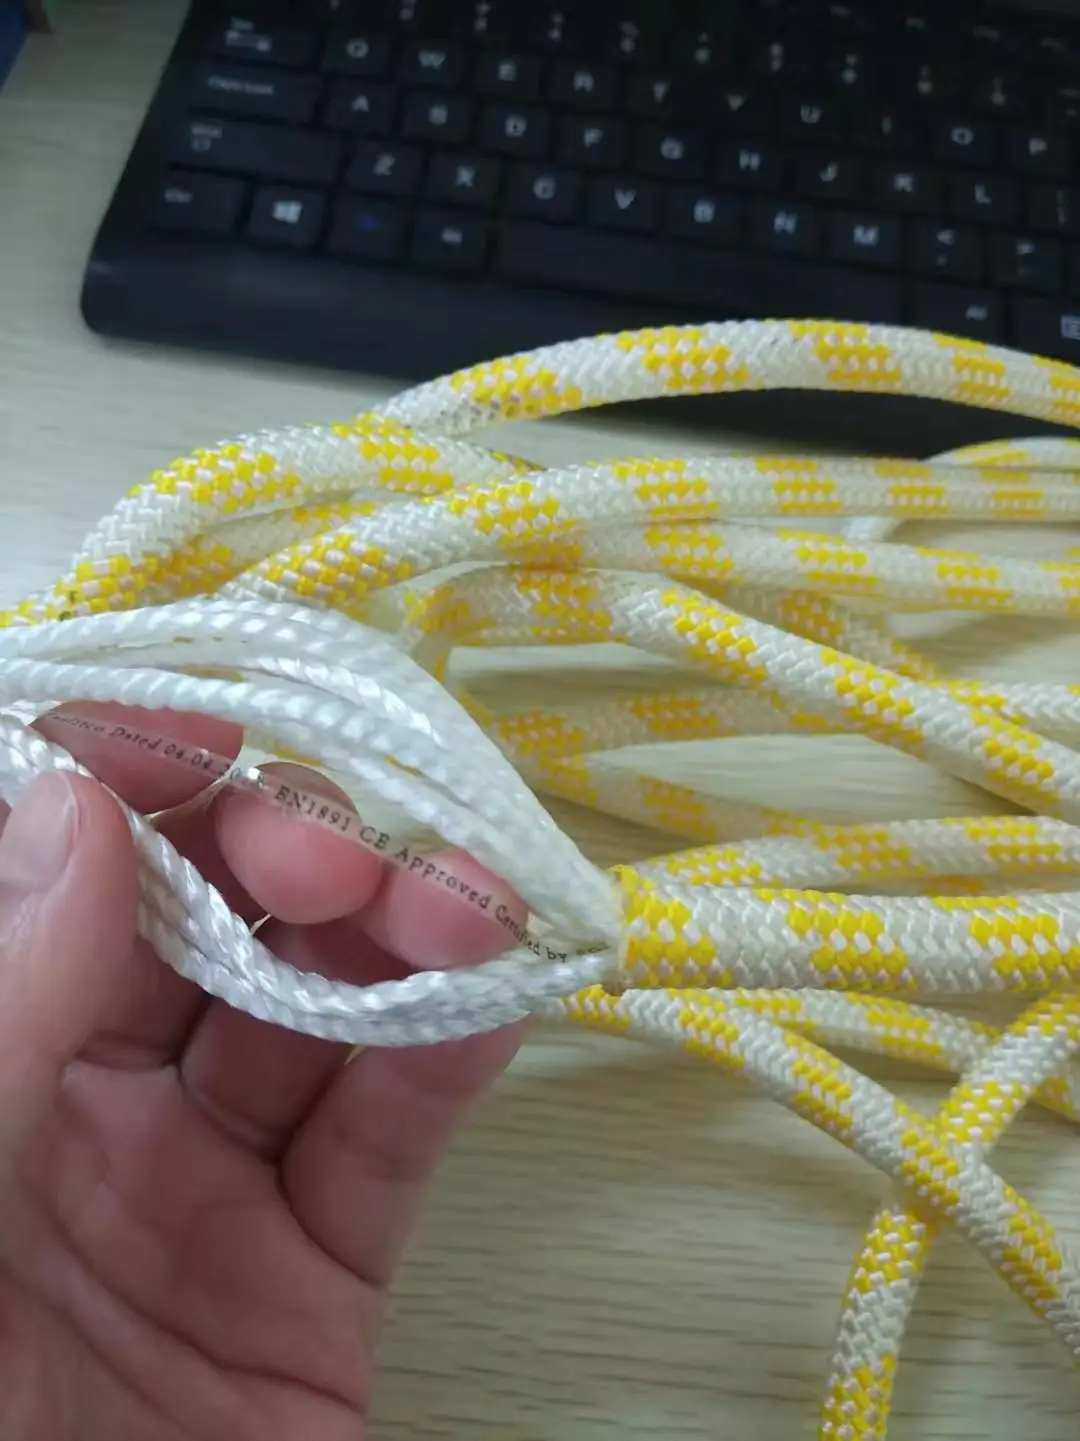 best climbing rope for rescue safety rope diameter 10.8mm